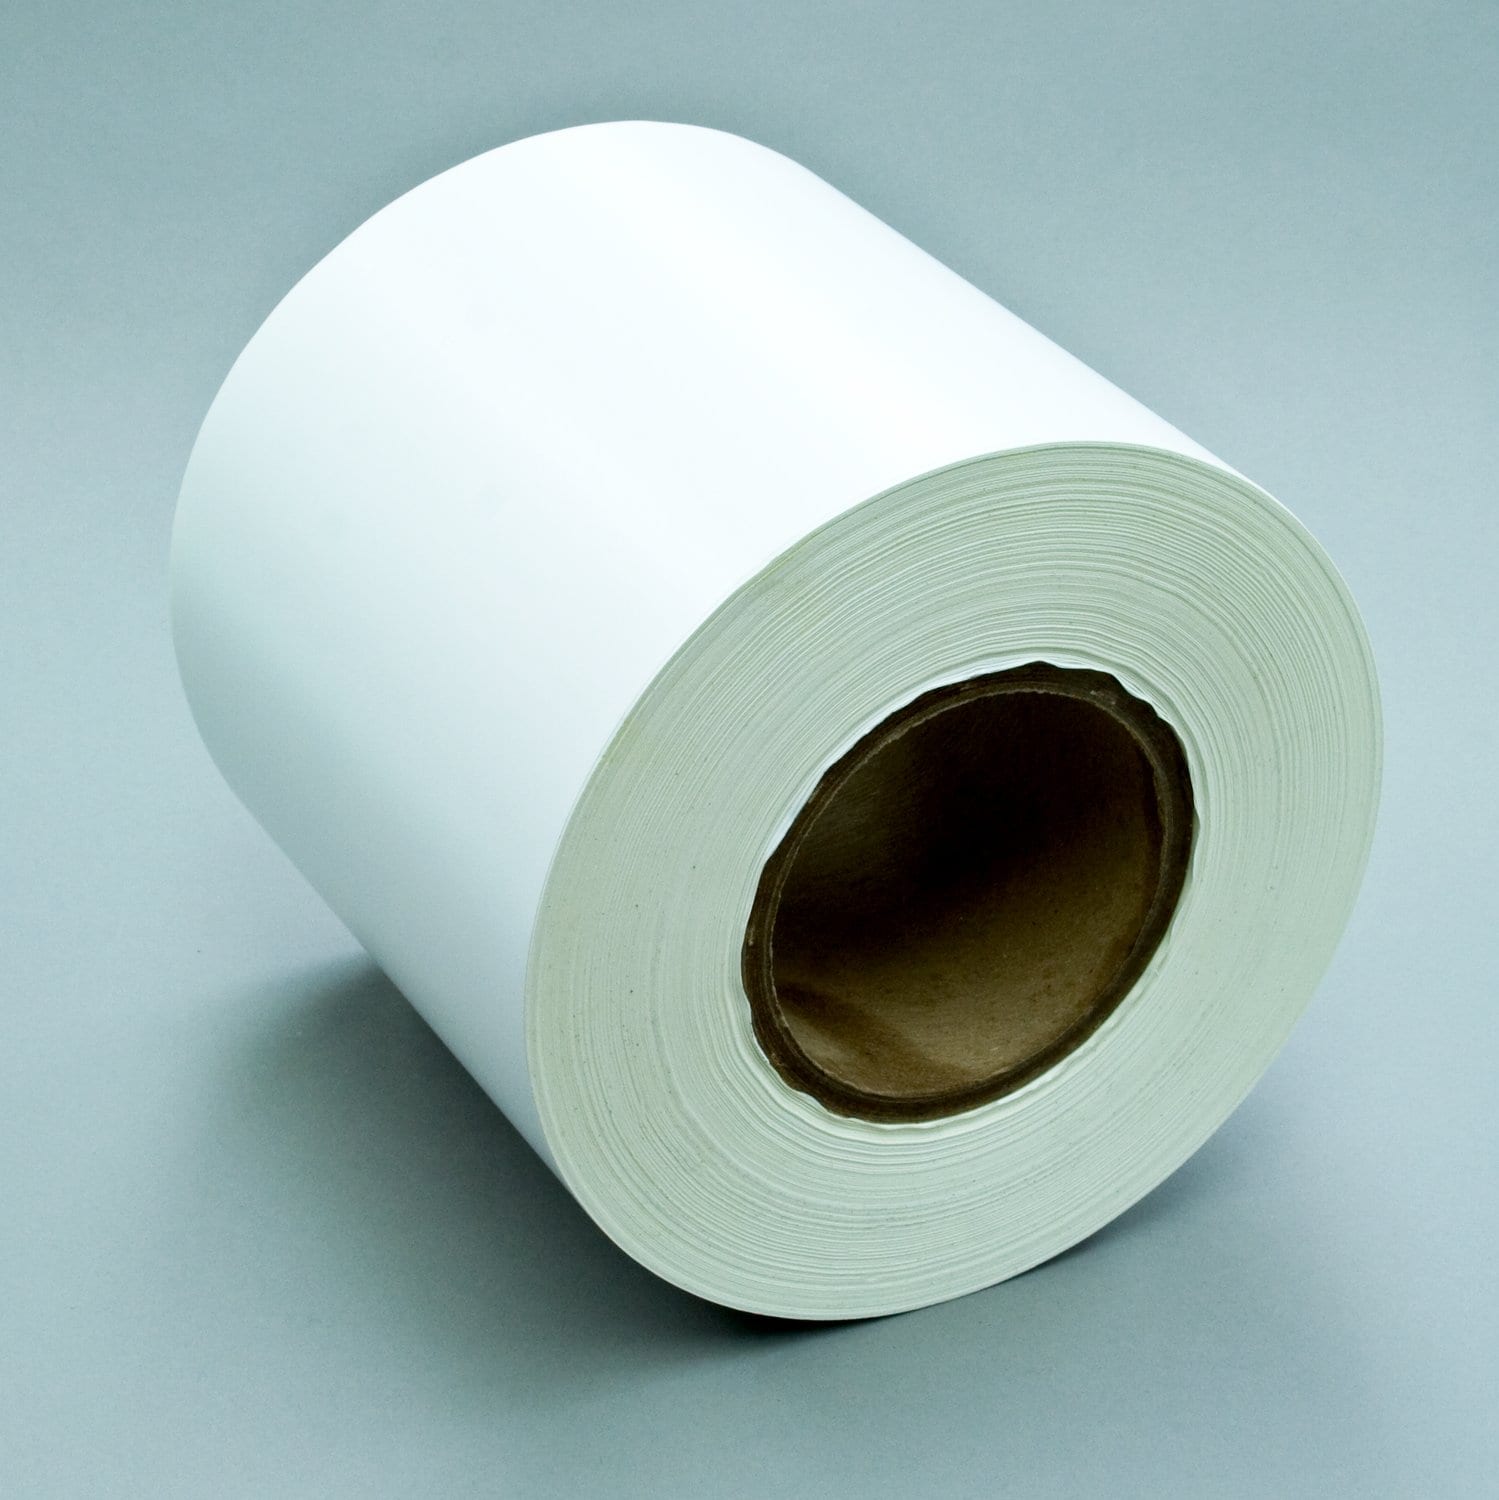 7100012493 - 3M Sheet and Screen Label Material 7045, White Vinyl, Roll, Config